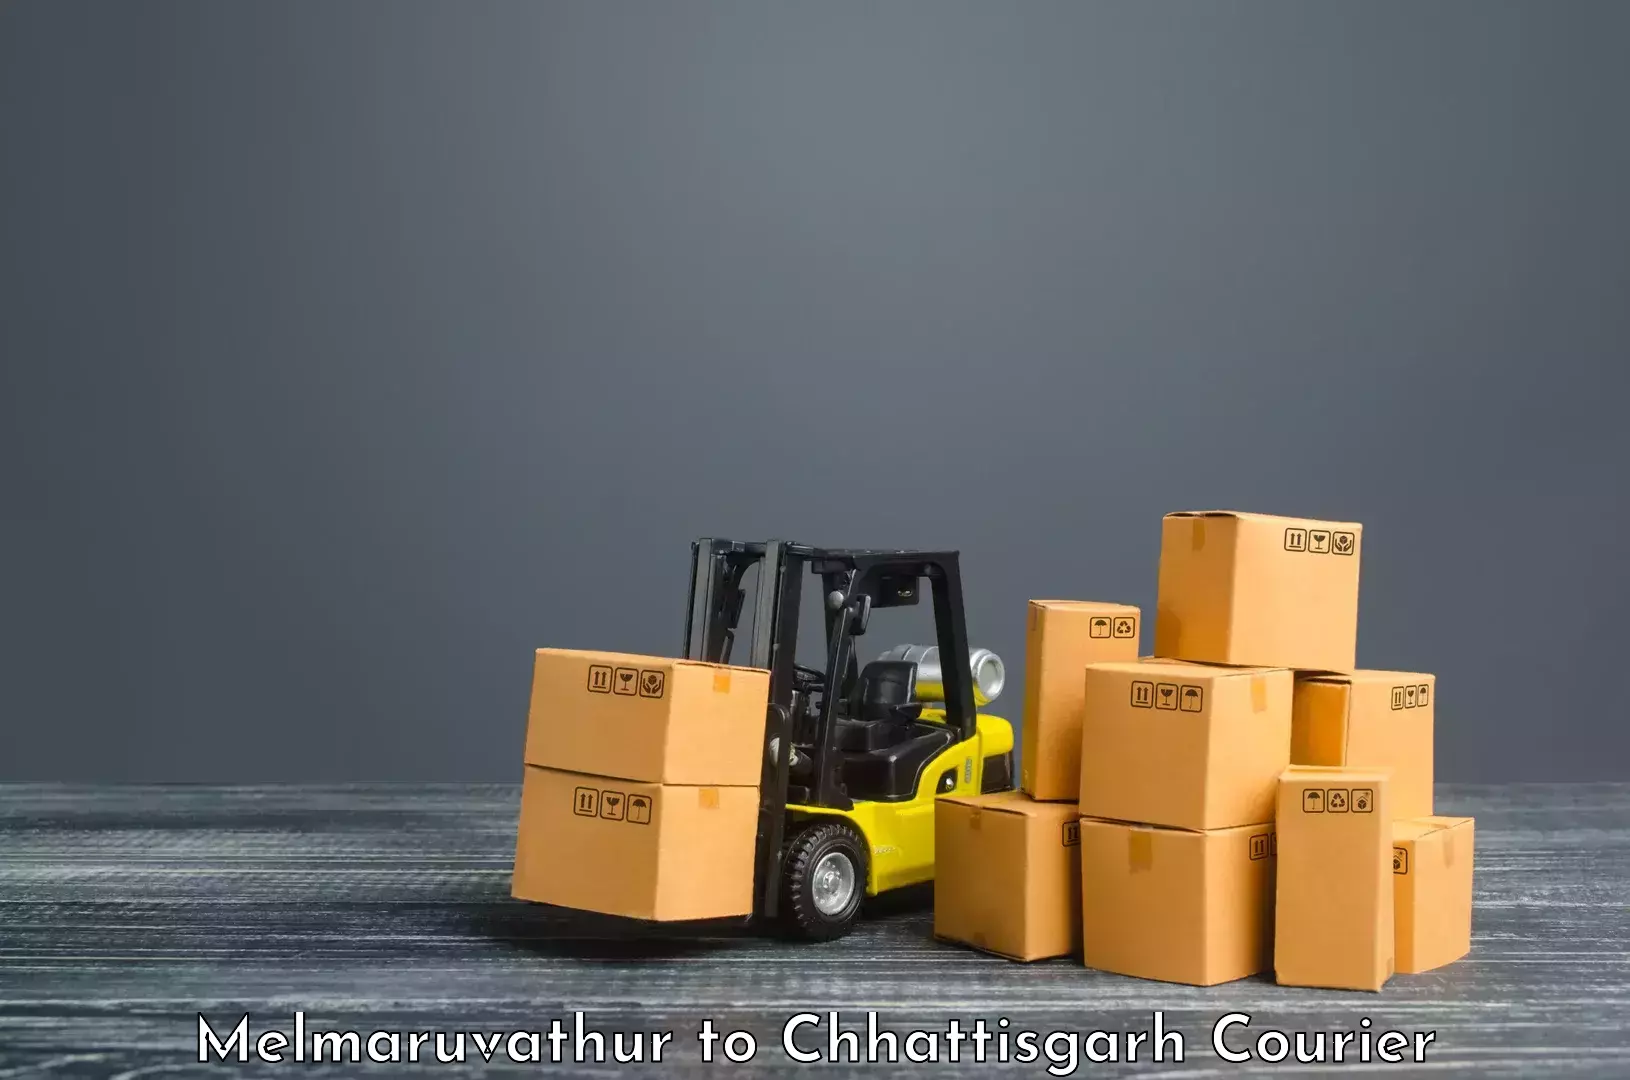 Easy access courier services Melmaruvathur to Chirimiri